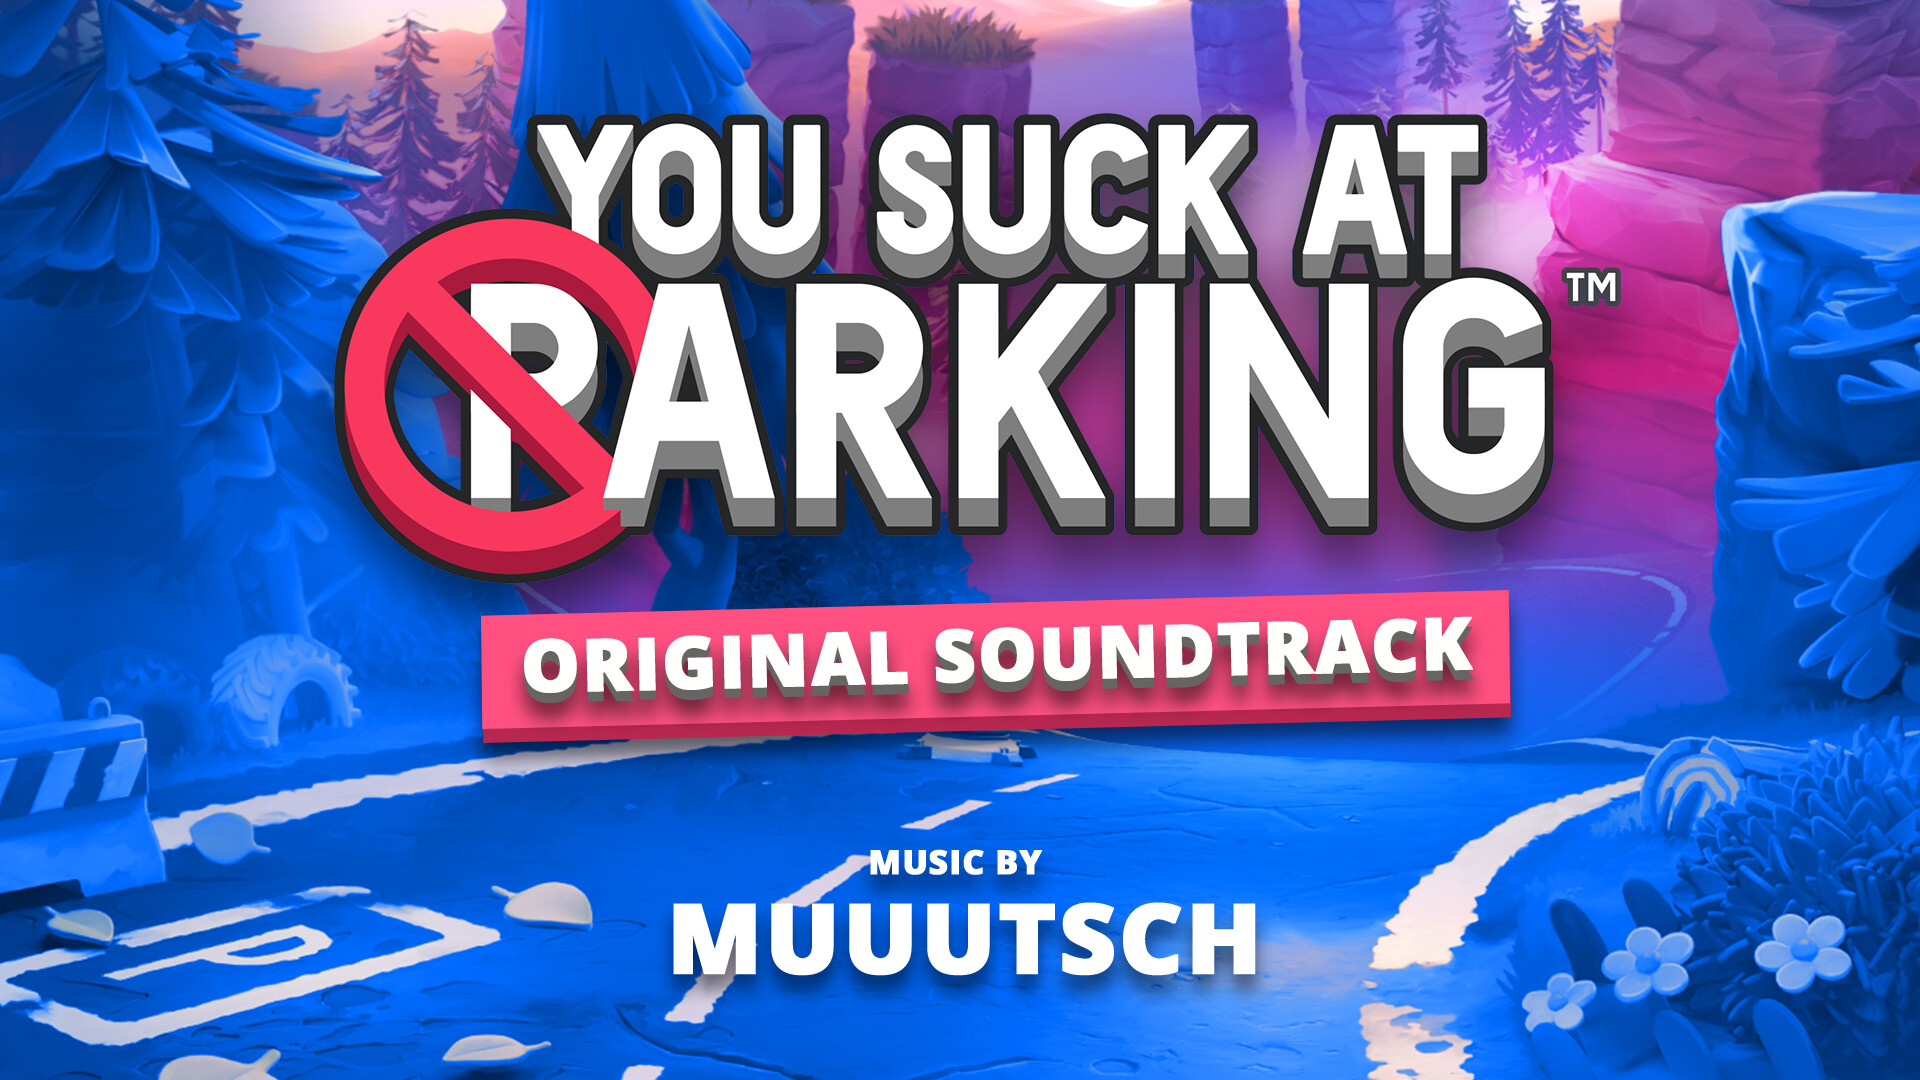 You Suck at Parking® Soundtrack Featured Screenshot #1